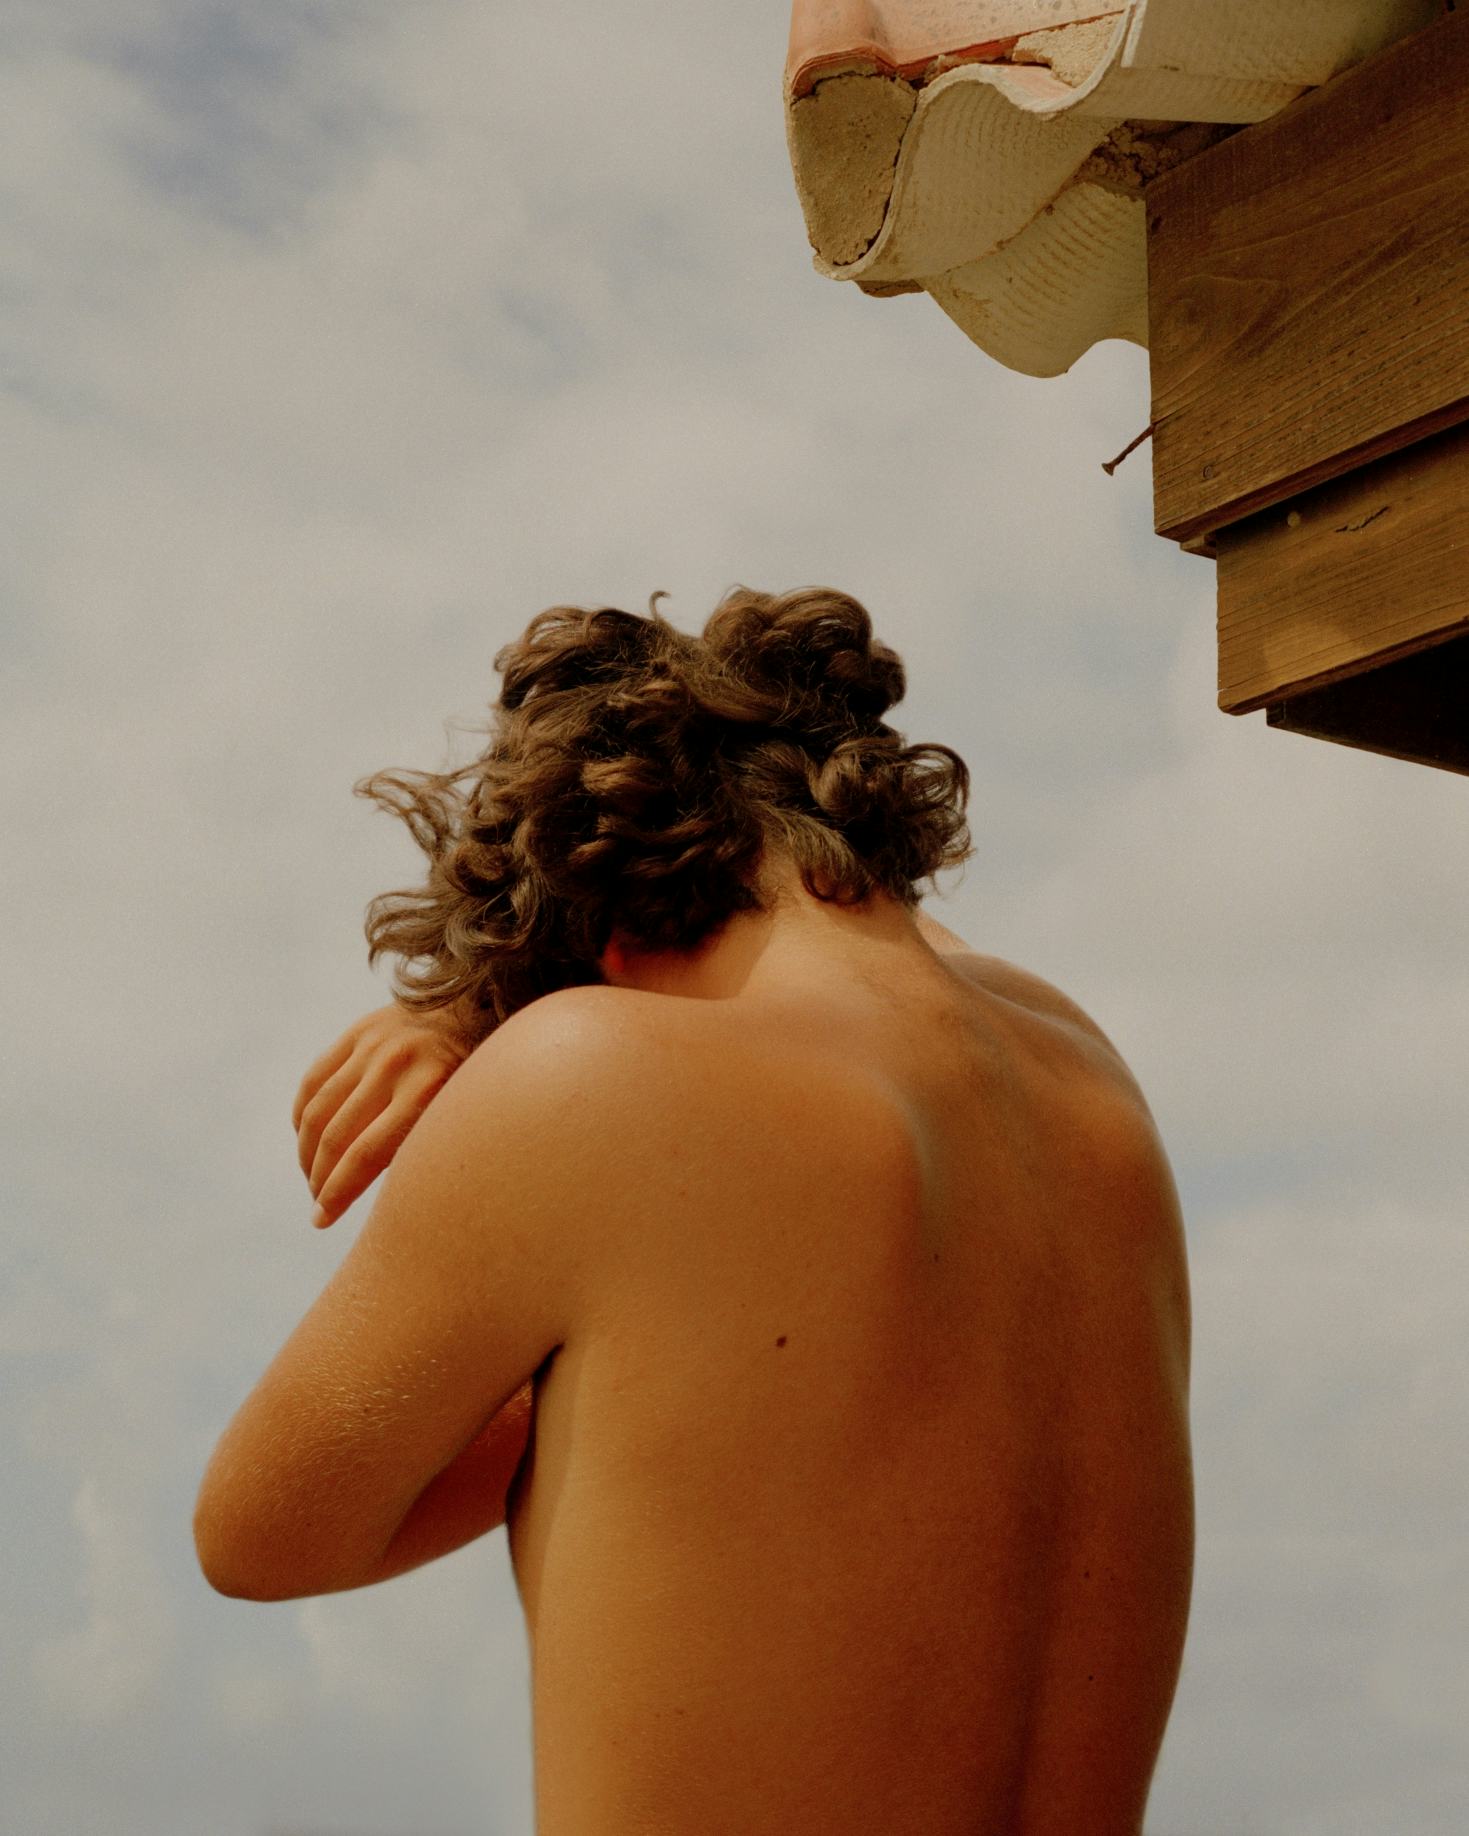 A young boy with his back turned to the camera, covering his head in his arms.